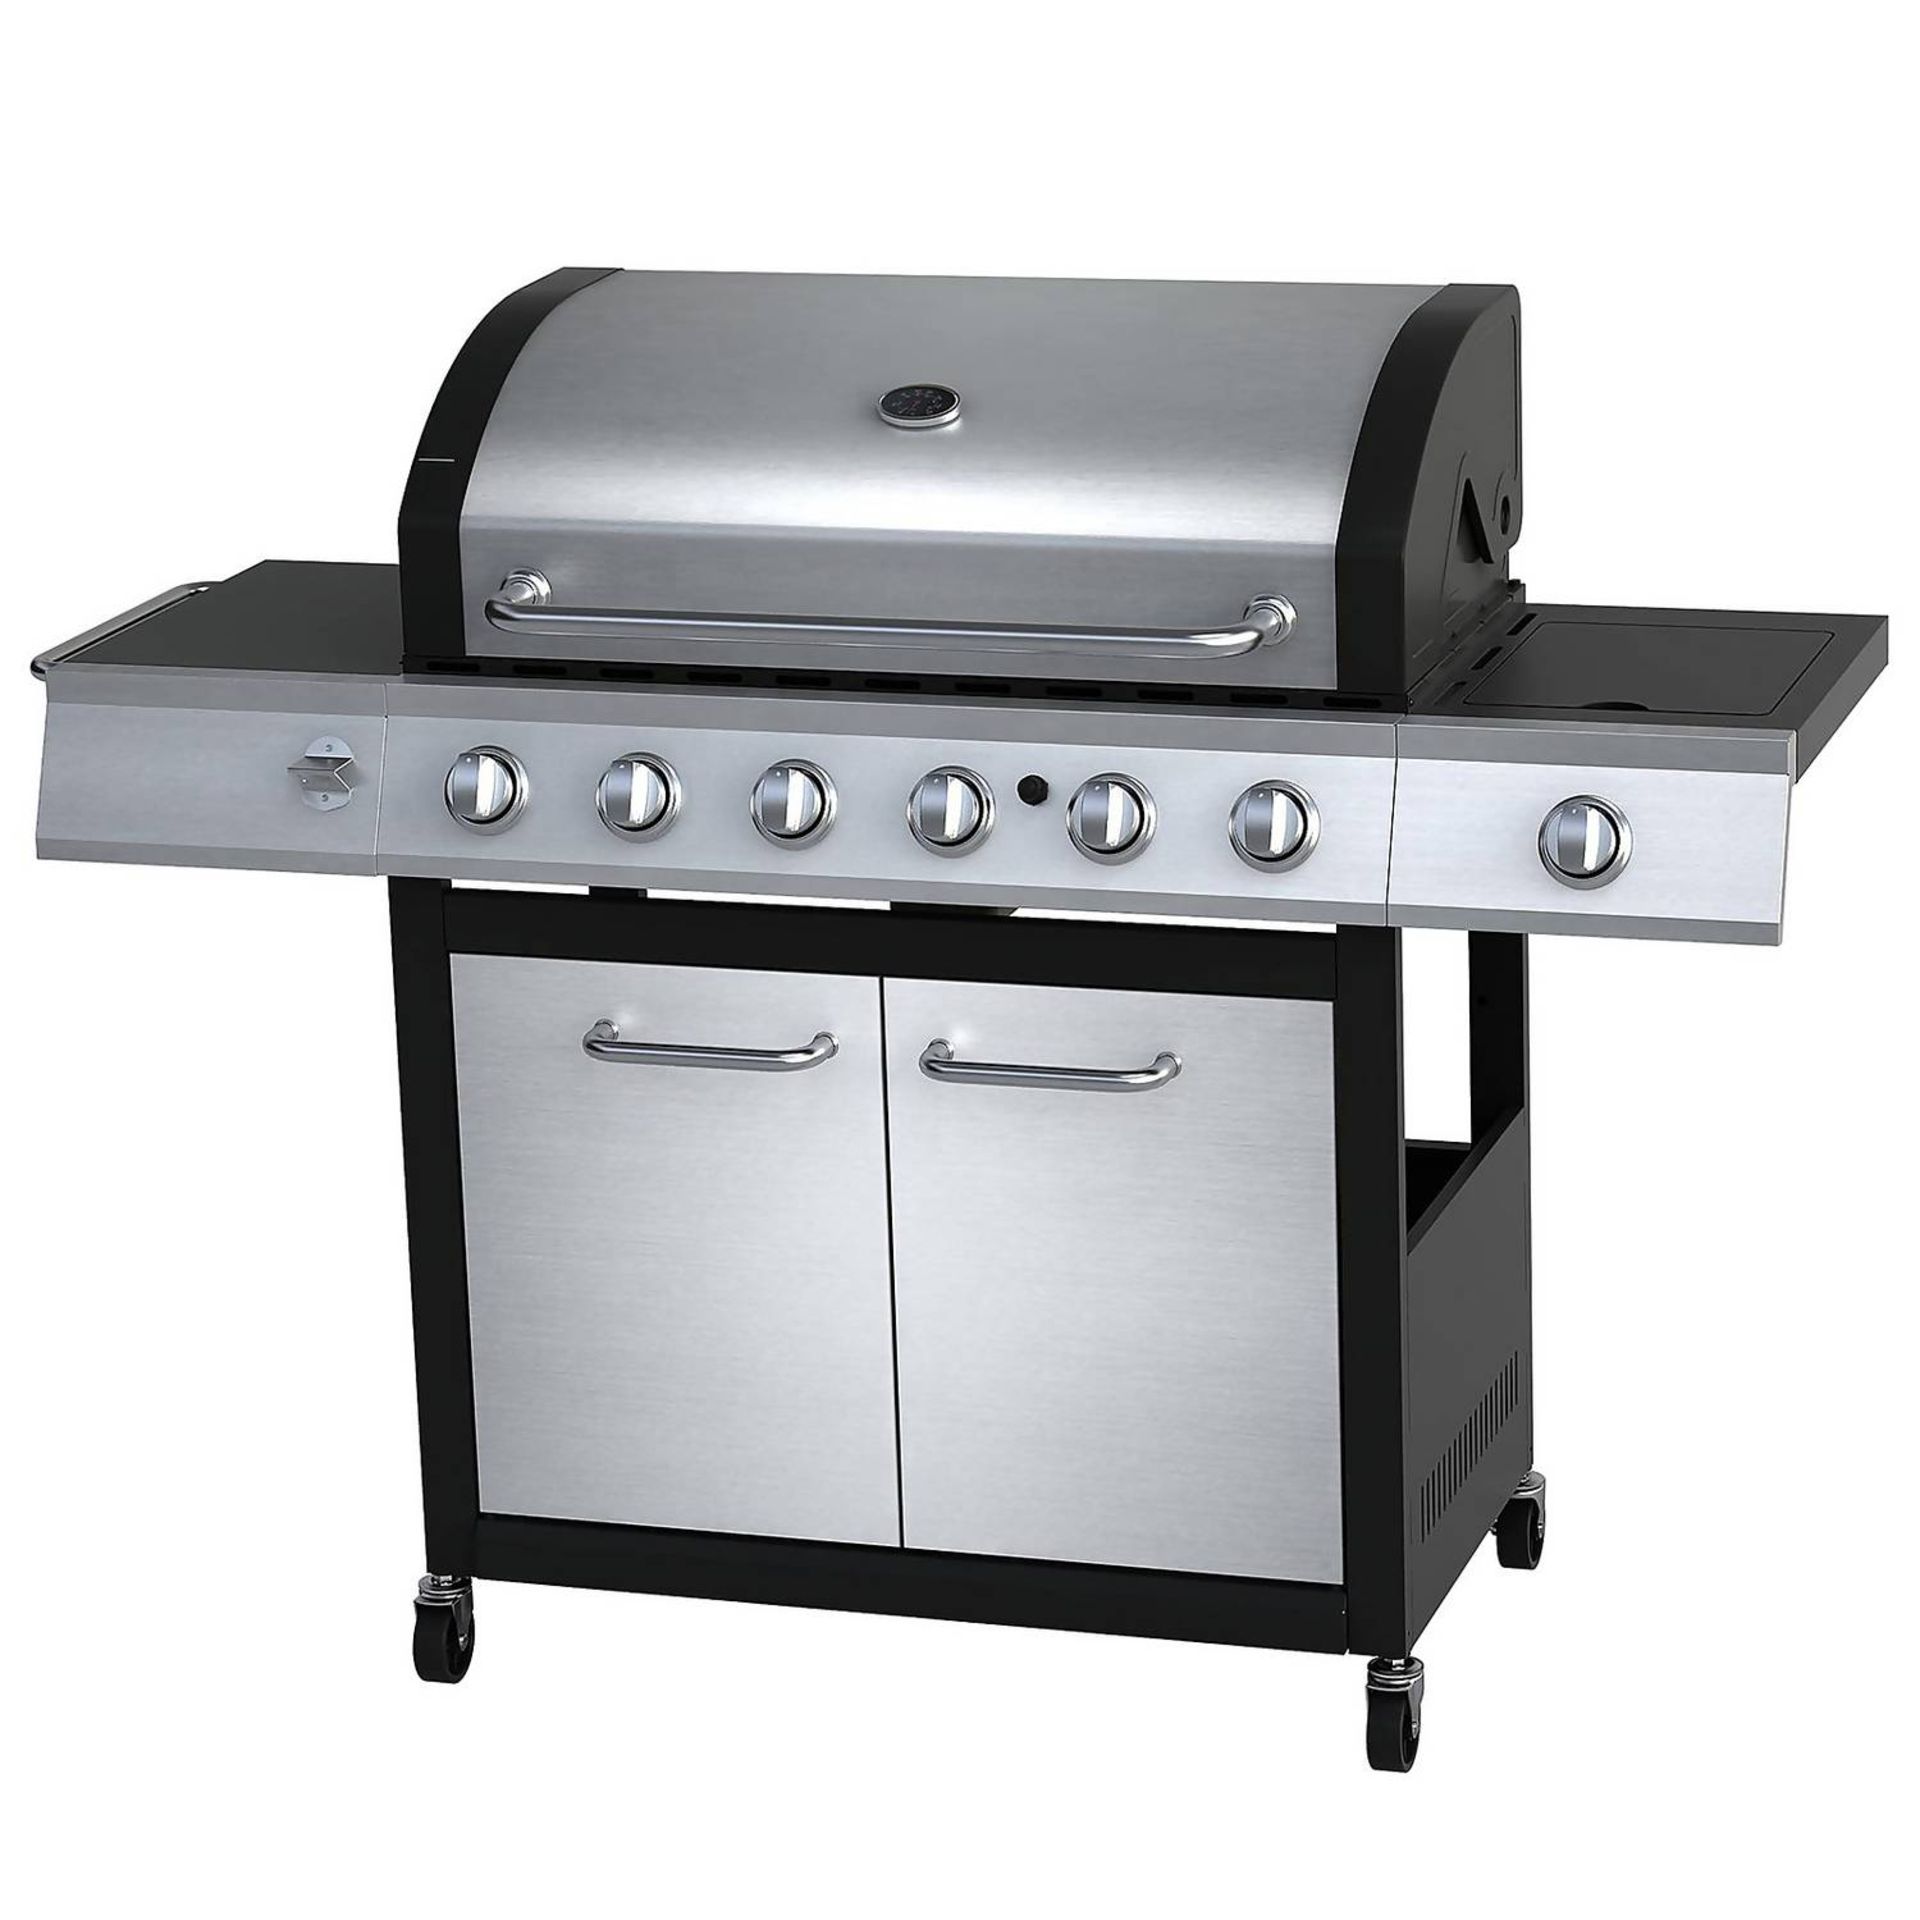 + VAT Brand New Texas Stardom 6 Burner Stainless Steel Gas BBQ - Temperature Gauge And Flame Tamers